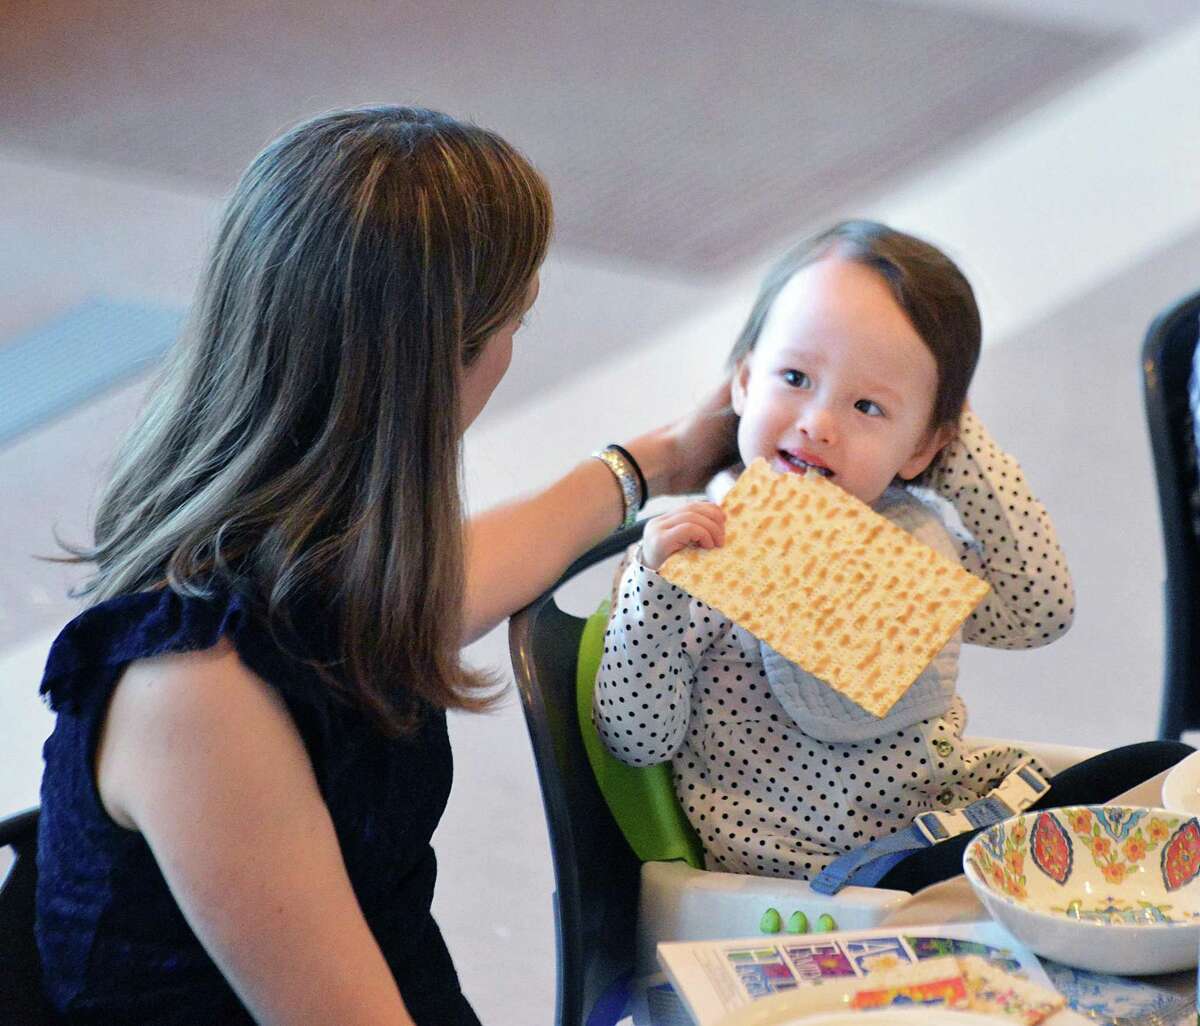 Norah Lee, 2, of Greenwich, enjoyed matzah during the community seder for Passover at the Greenwich Reform Synagogue in the Cos Cob section of Greenwich, Conn., Saturday night, March 31, 2018.